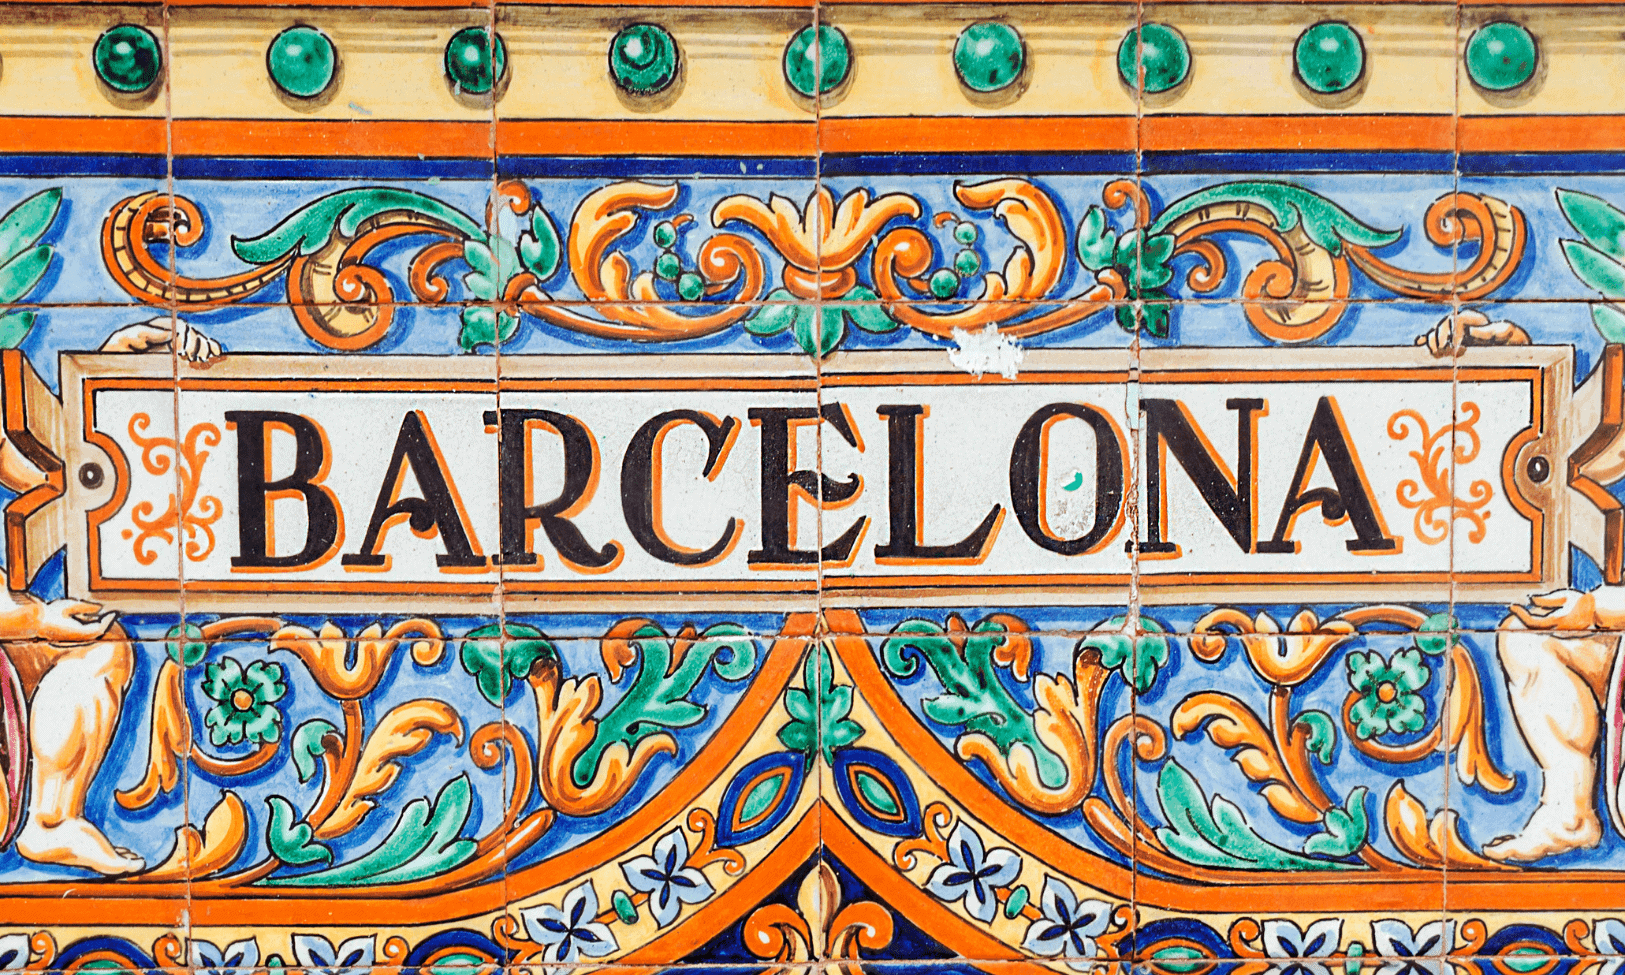 The most unusual things to do in Barcelona